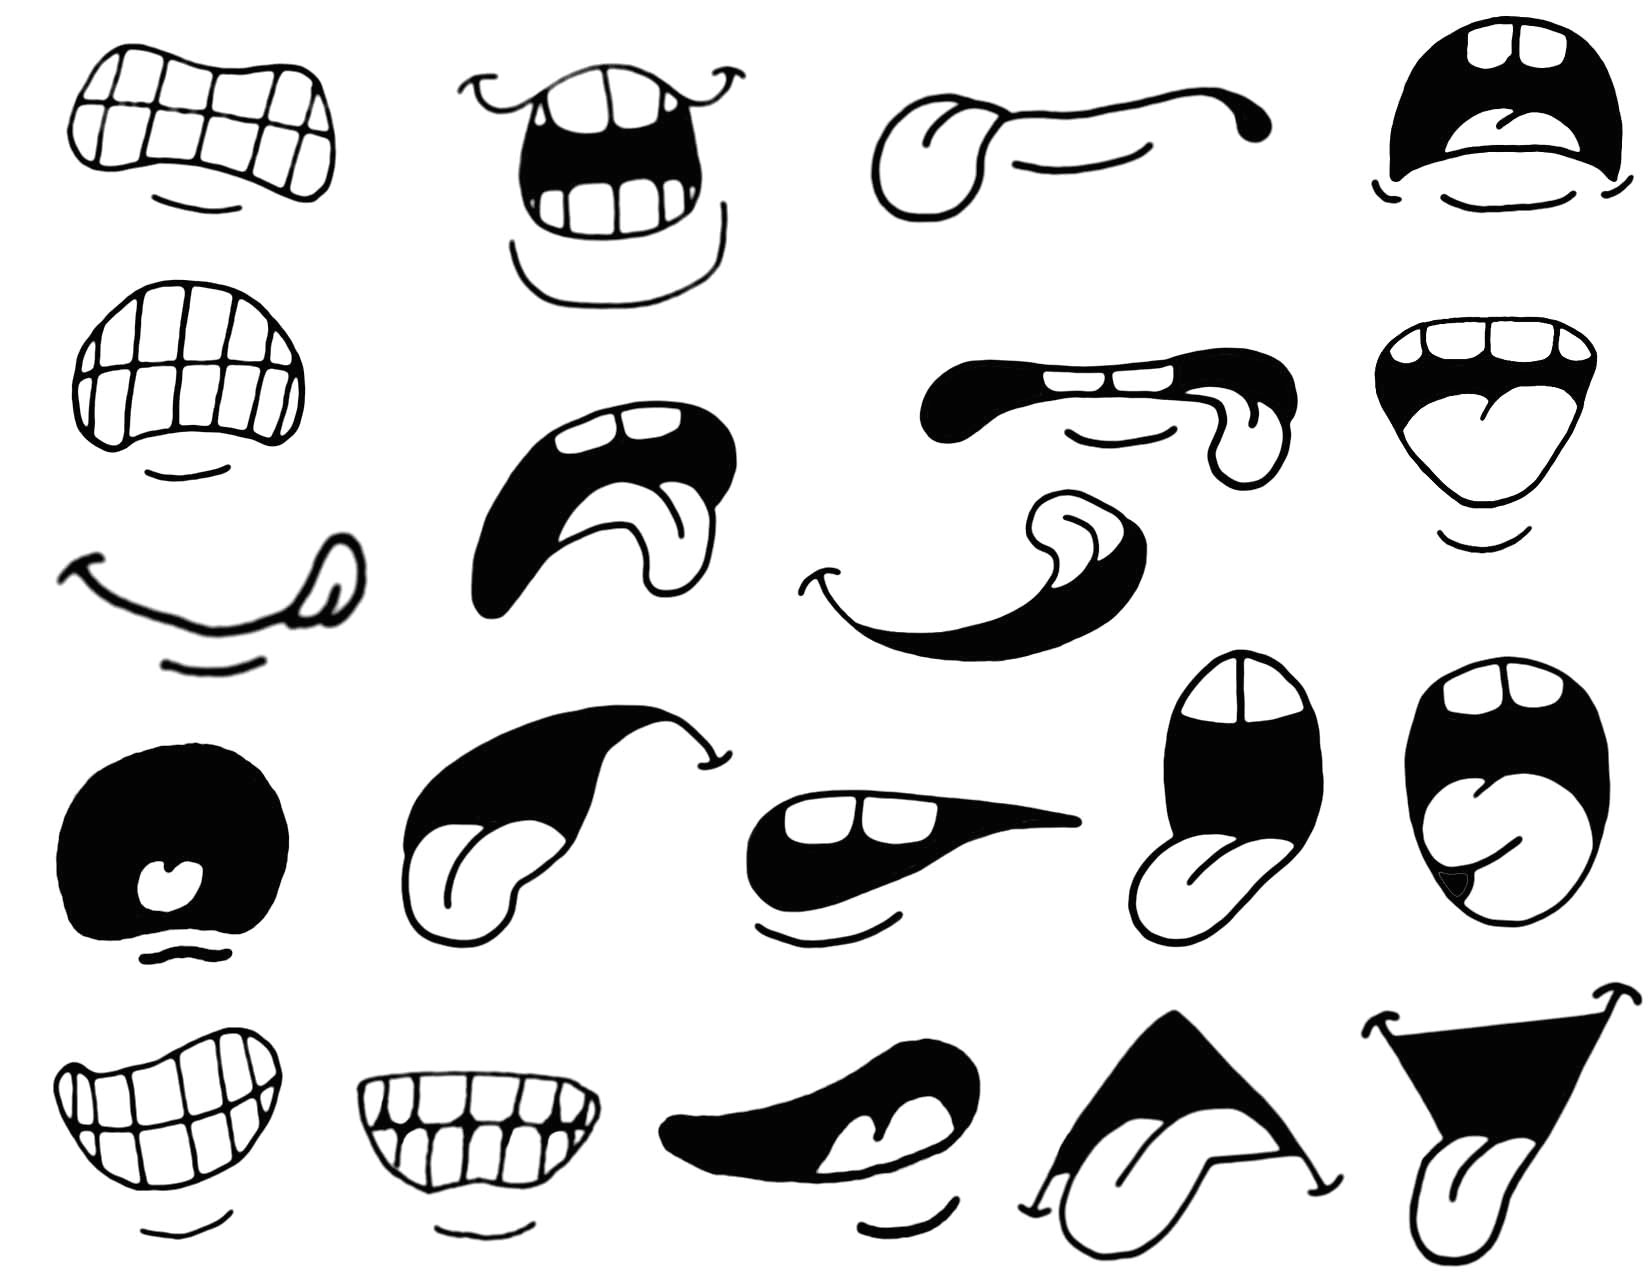 Drawing A Cartoon Mouth Pictures Of Cartoon Mouths Group with 65 Items